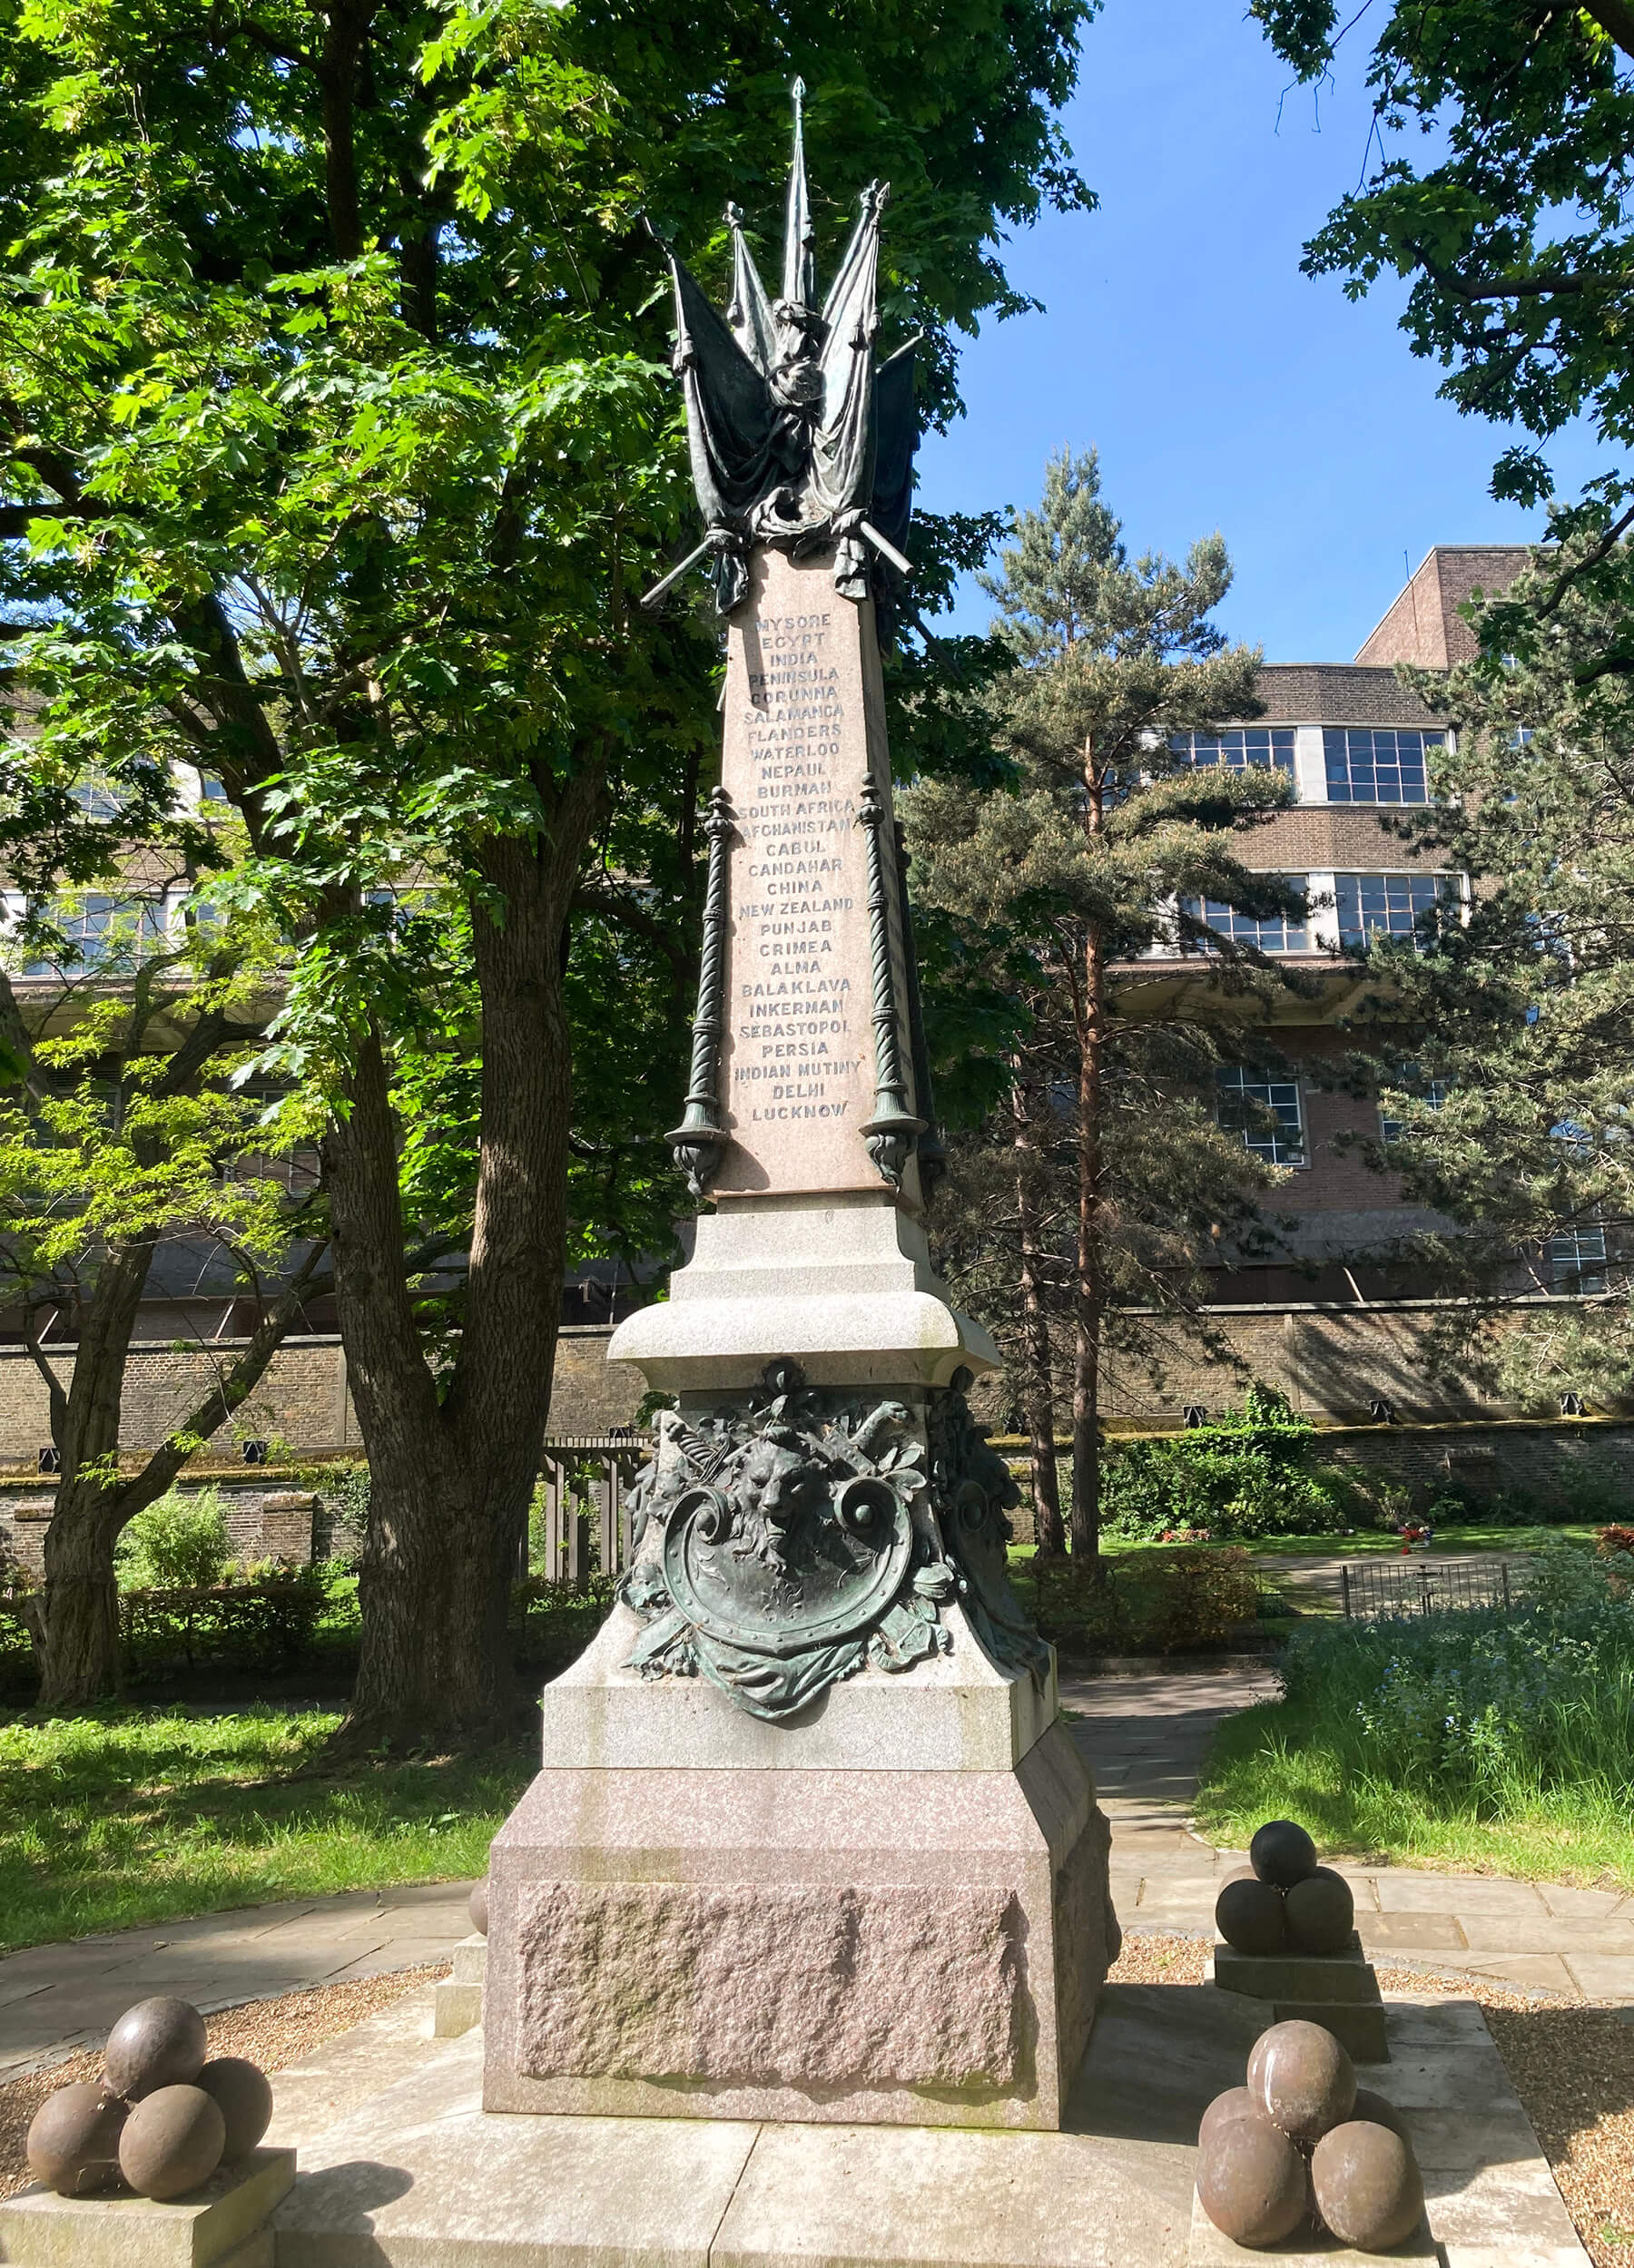 Brompton Cemetery’s memorial to the Chelsea Pensioners “erected on behalf of an admiring nation” features flags, cannon balls and bronze lion heads.